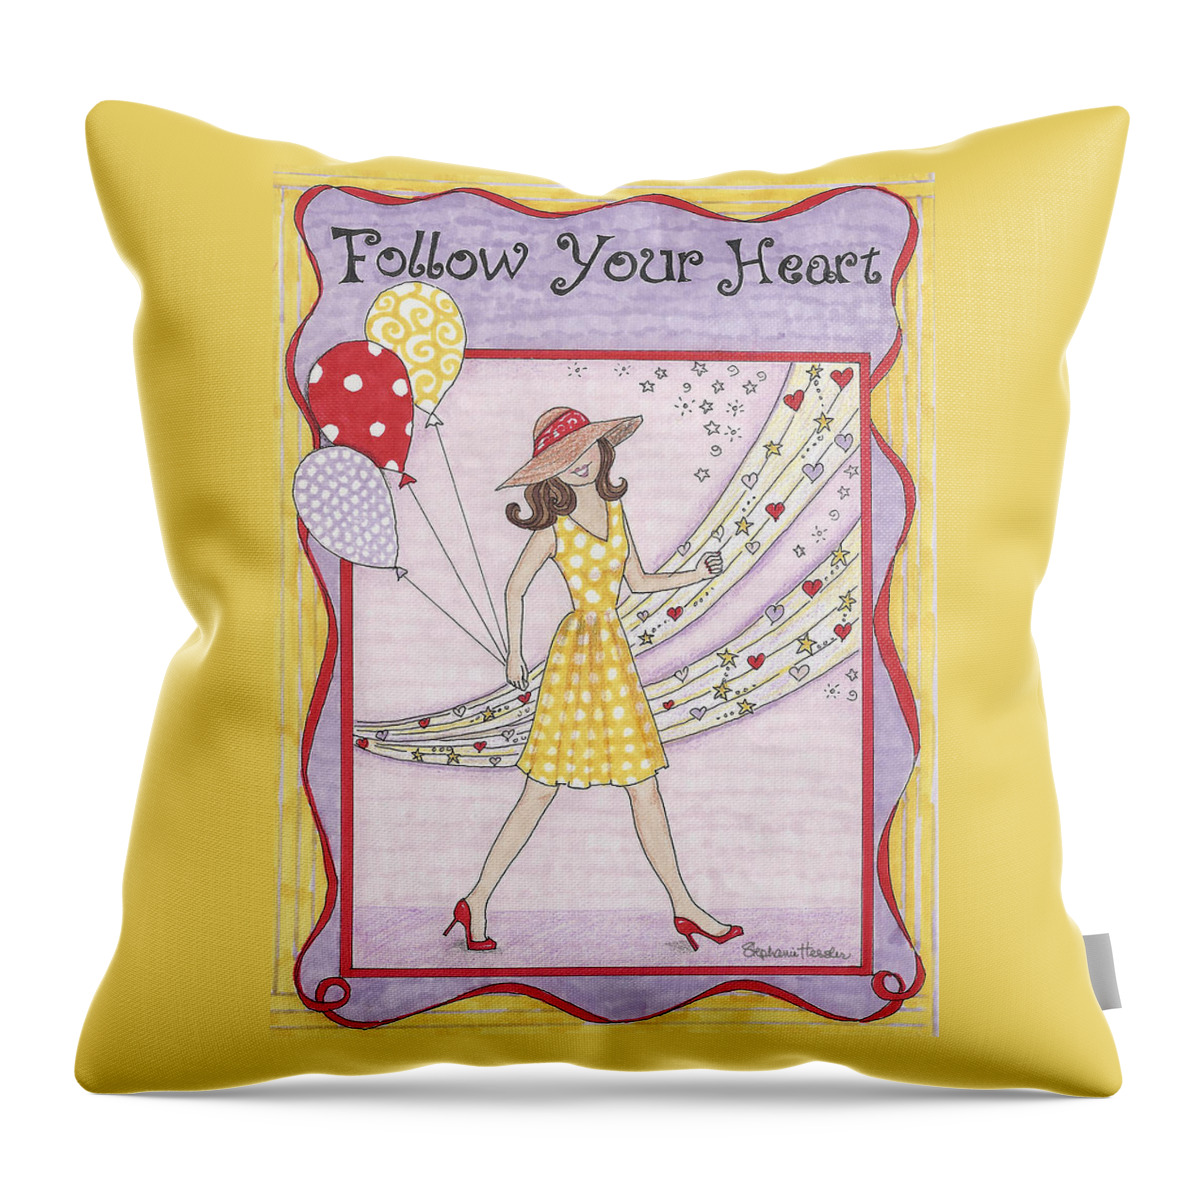 Follow Your Heart Throw Pillow featuring the mixed media Follow Your Heart by Stephanie Hessler